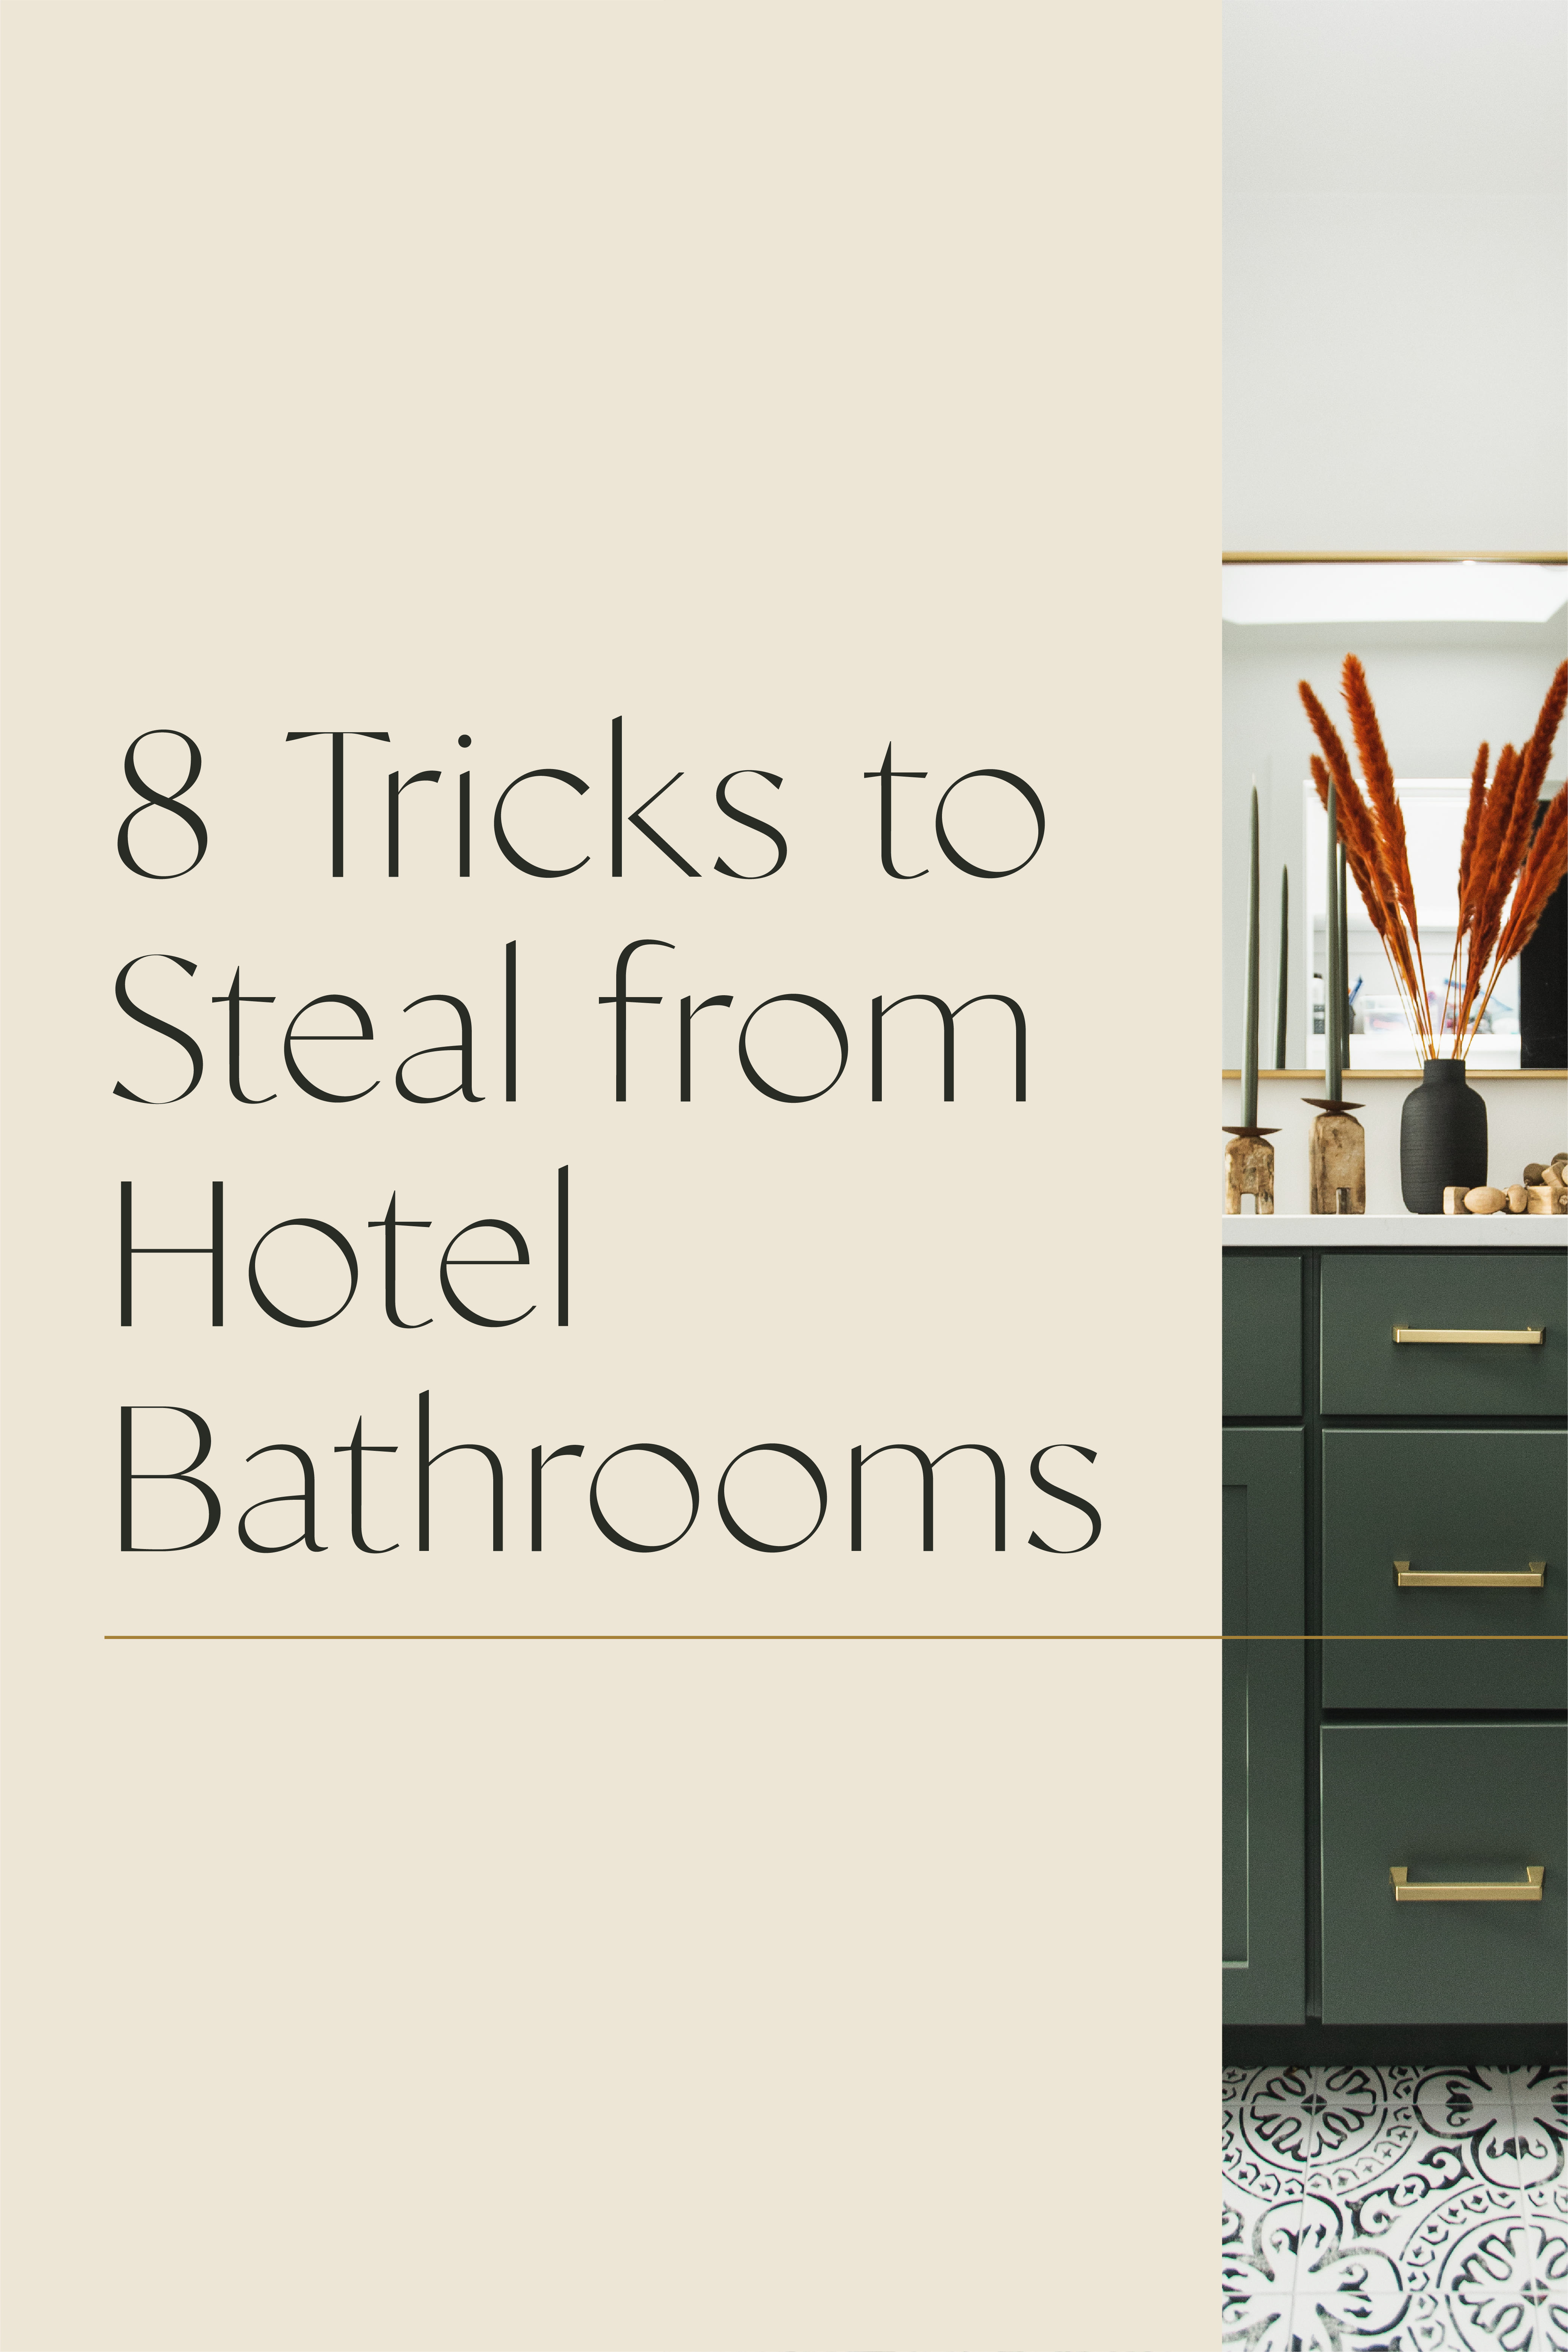 8 Tricks to Steal from Hotel Bathrooms 3